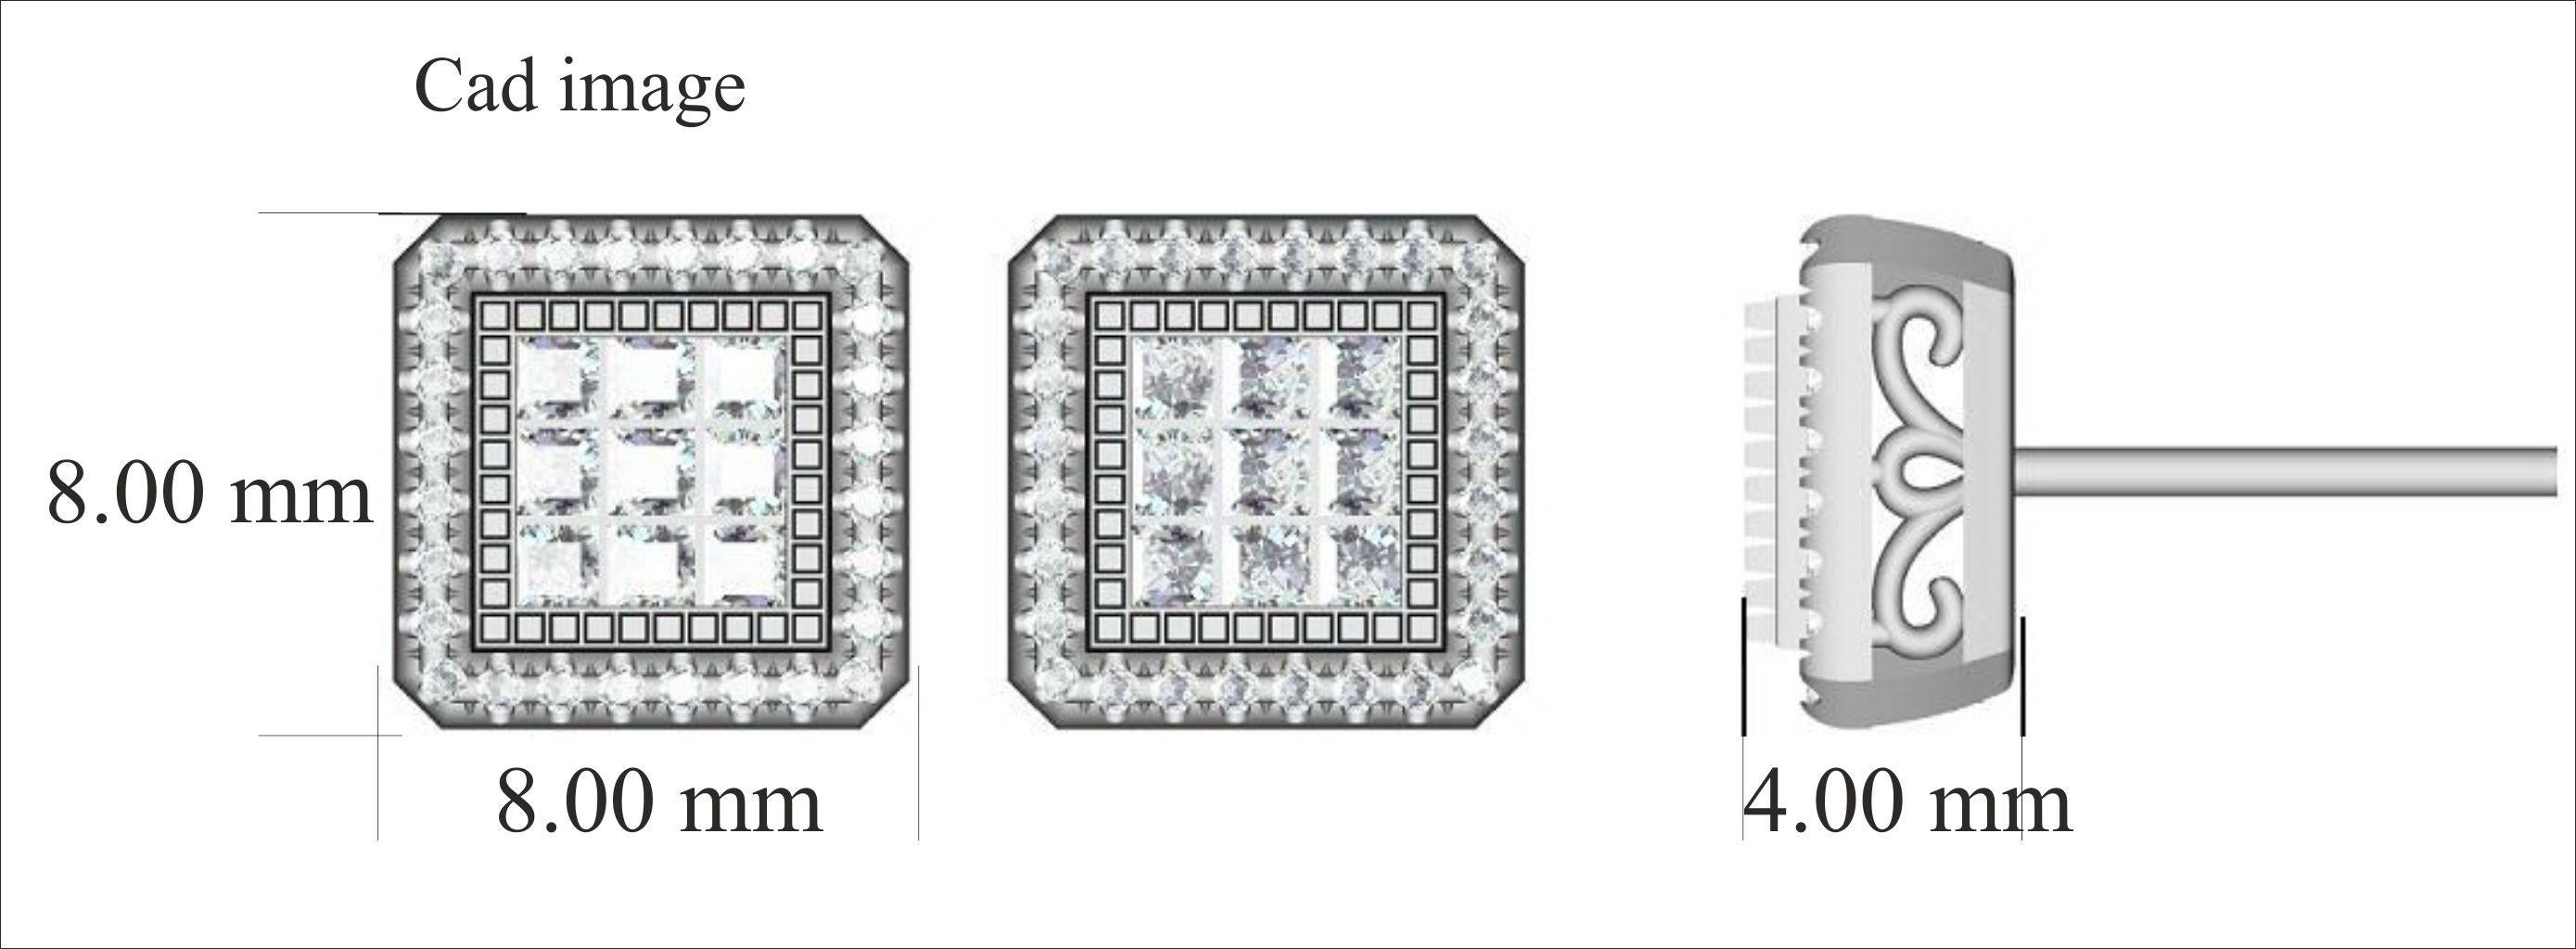 Adorn your casual wear with extra glitz when you put on these square frame stud earrings. Expertly crafted in 14K White Gold, earring is cleverly filled with 56 round and 18 princess cut diamond set in pave and invisible setting and shimmers in H-I